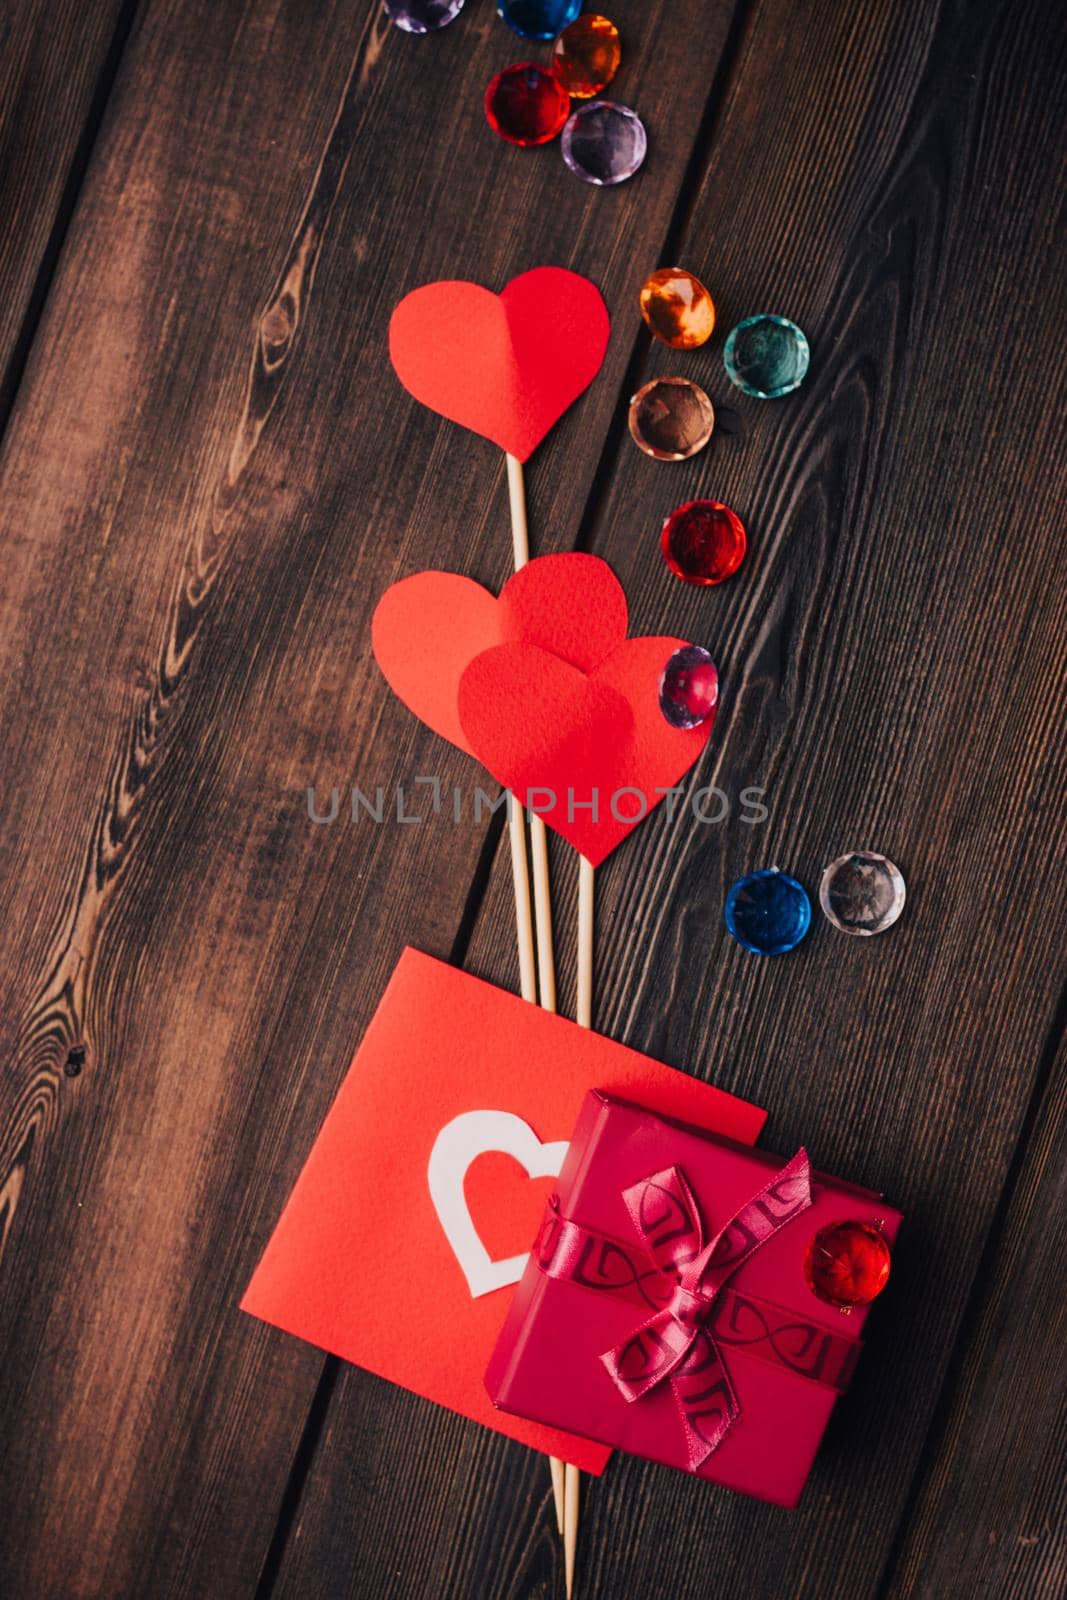 gifts decoration hearts holiday wooden background design by Vichizh